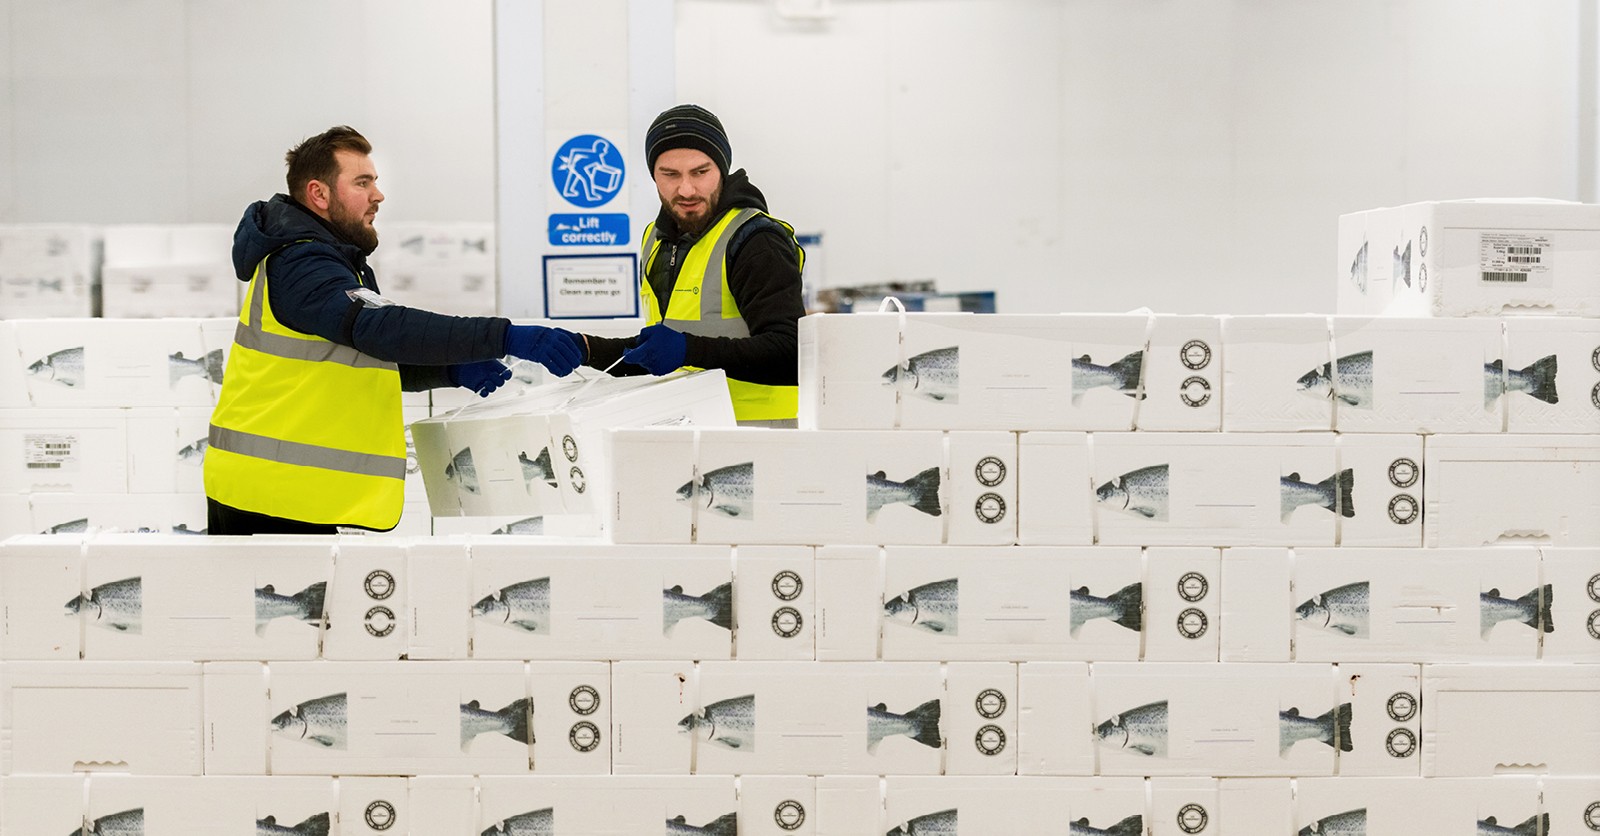 Kuehne+Nagel expands its perishables network with the acquisition of Salmosped in Norway. Image: K+N